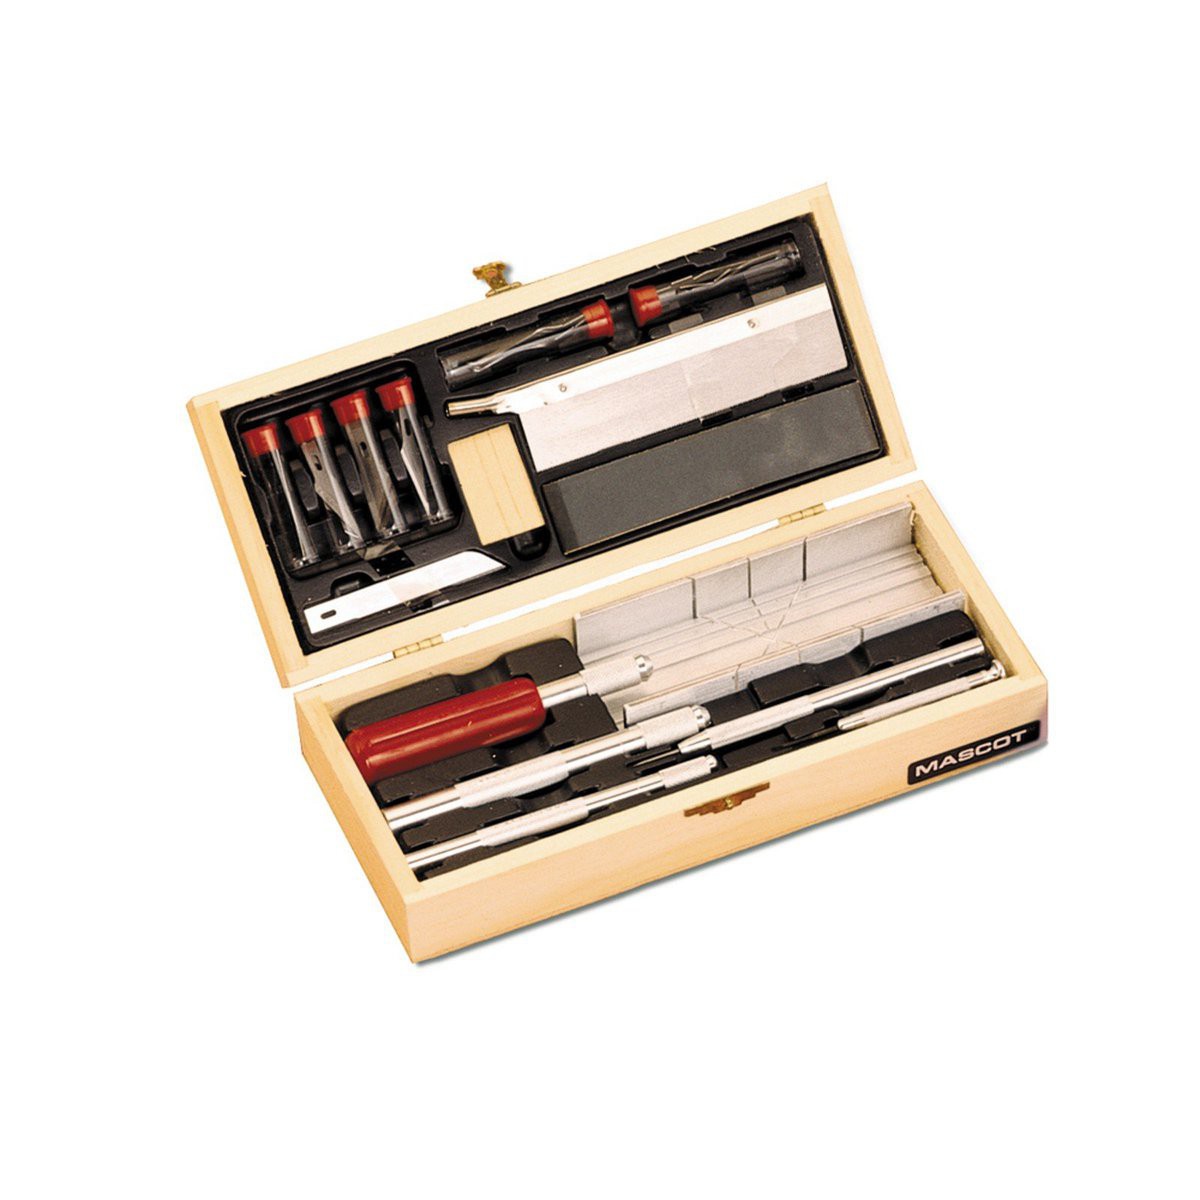 Deluxe Craftsman and Tool Set